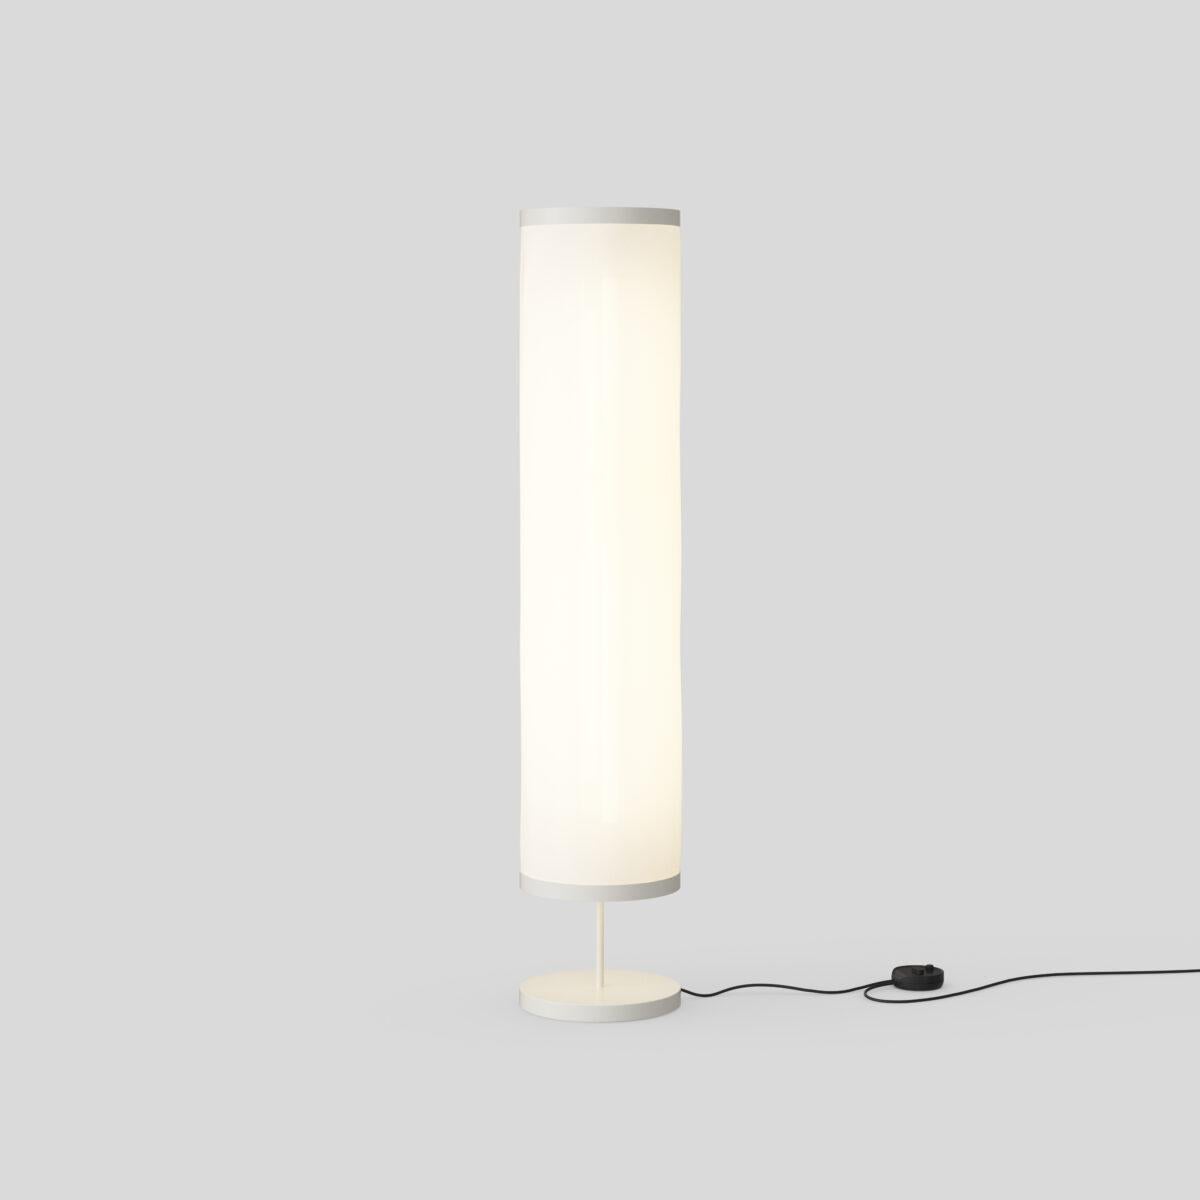 Isol Floor Lamp
Design by David Thulstrup

Specifications: Isolators
Typology: Floor
Materials: Aluminium Structure, Acoustic Absorbent Fabric Diffuser with Snowsound® Technology
Dimensions: Ø 300 x H 1480 mm 
Diffuser diameter: Ø 300 mm x 1260